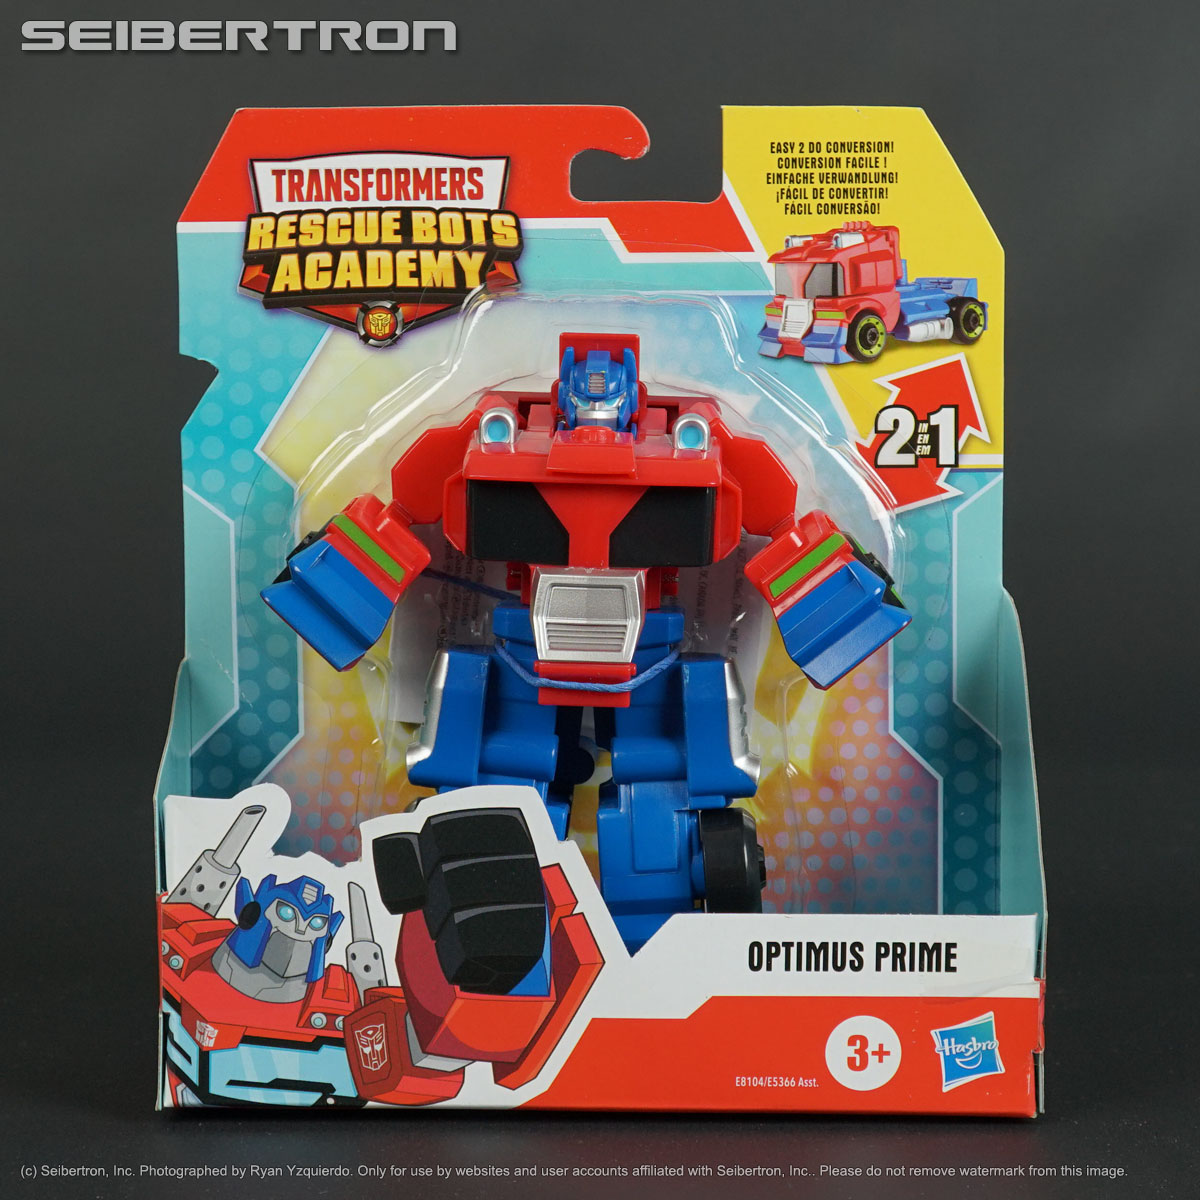 Rescan OPTIMUS PRIME Transformers Rescue Bots Academy 2020 Racing Truck 2020